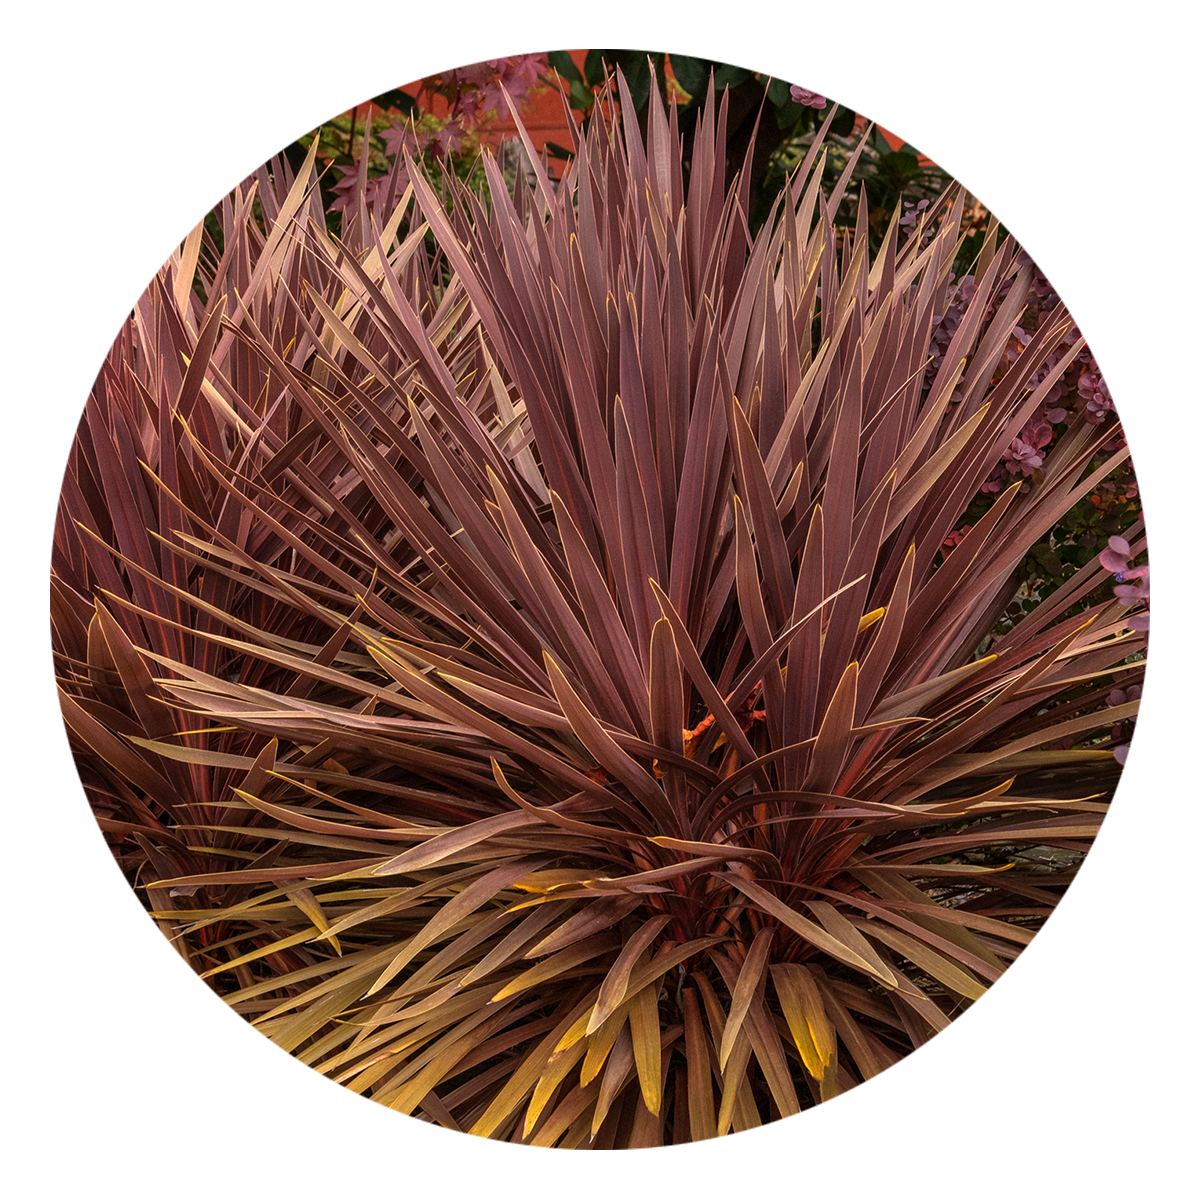 View Here: Cordyline 'Red Star'